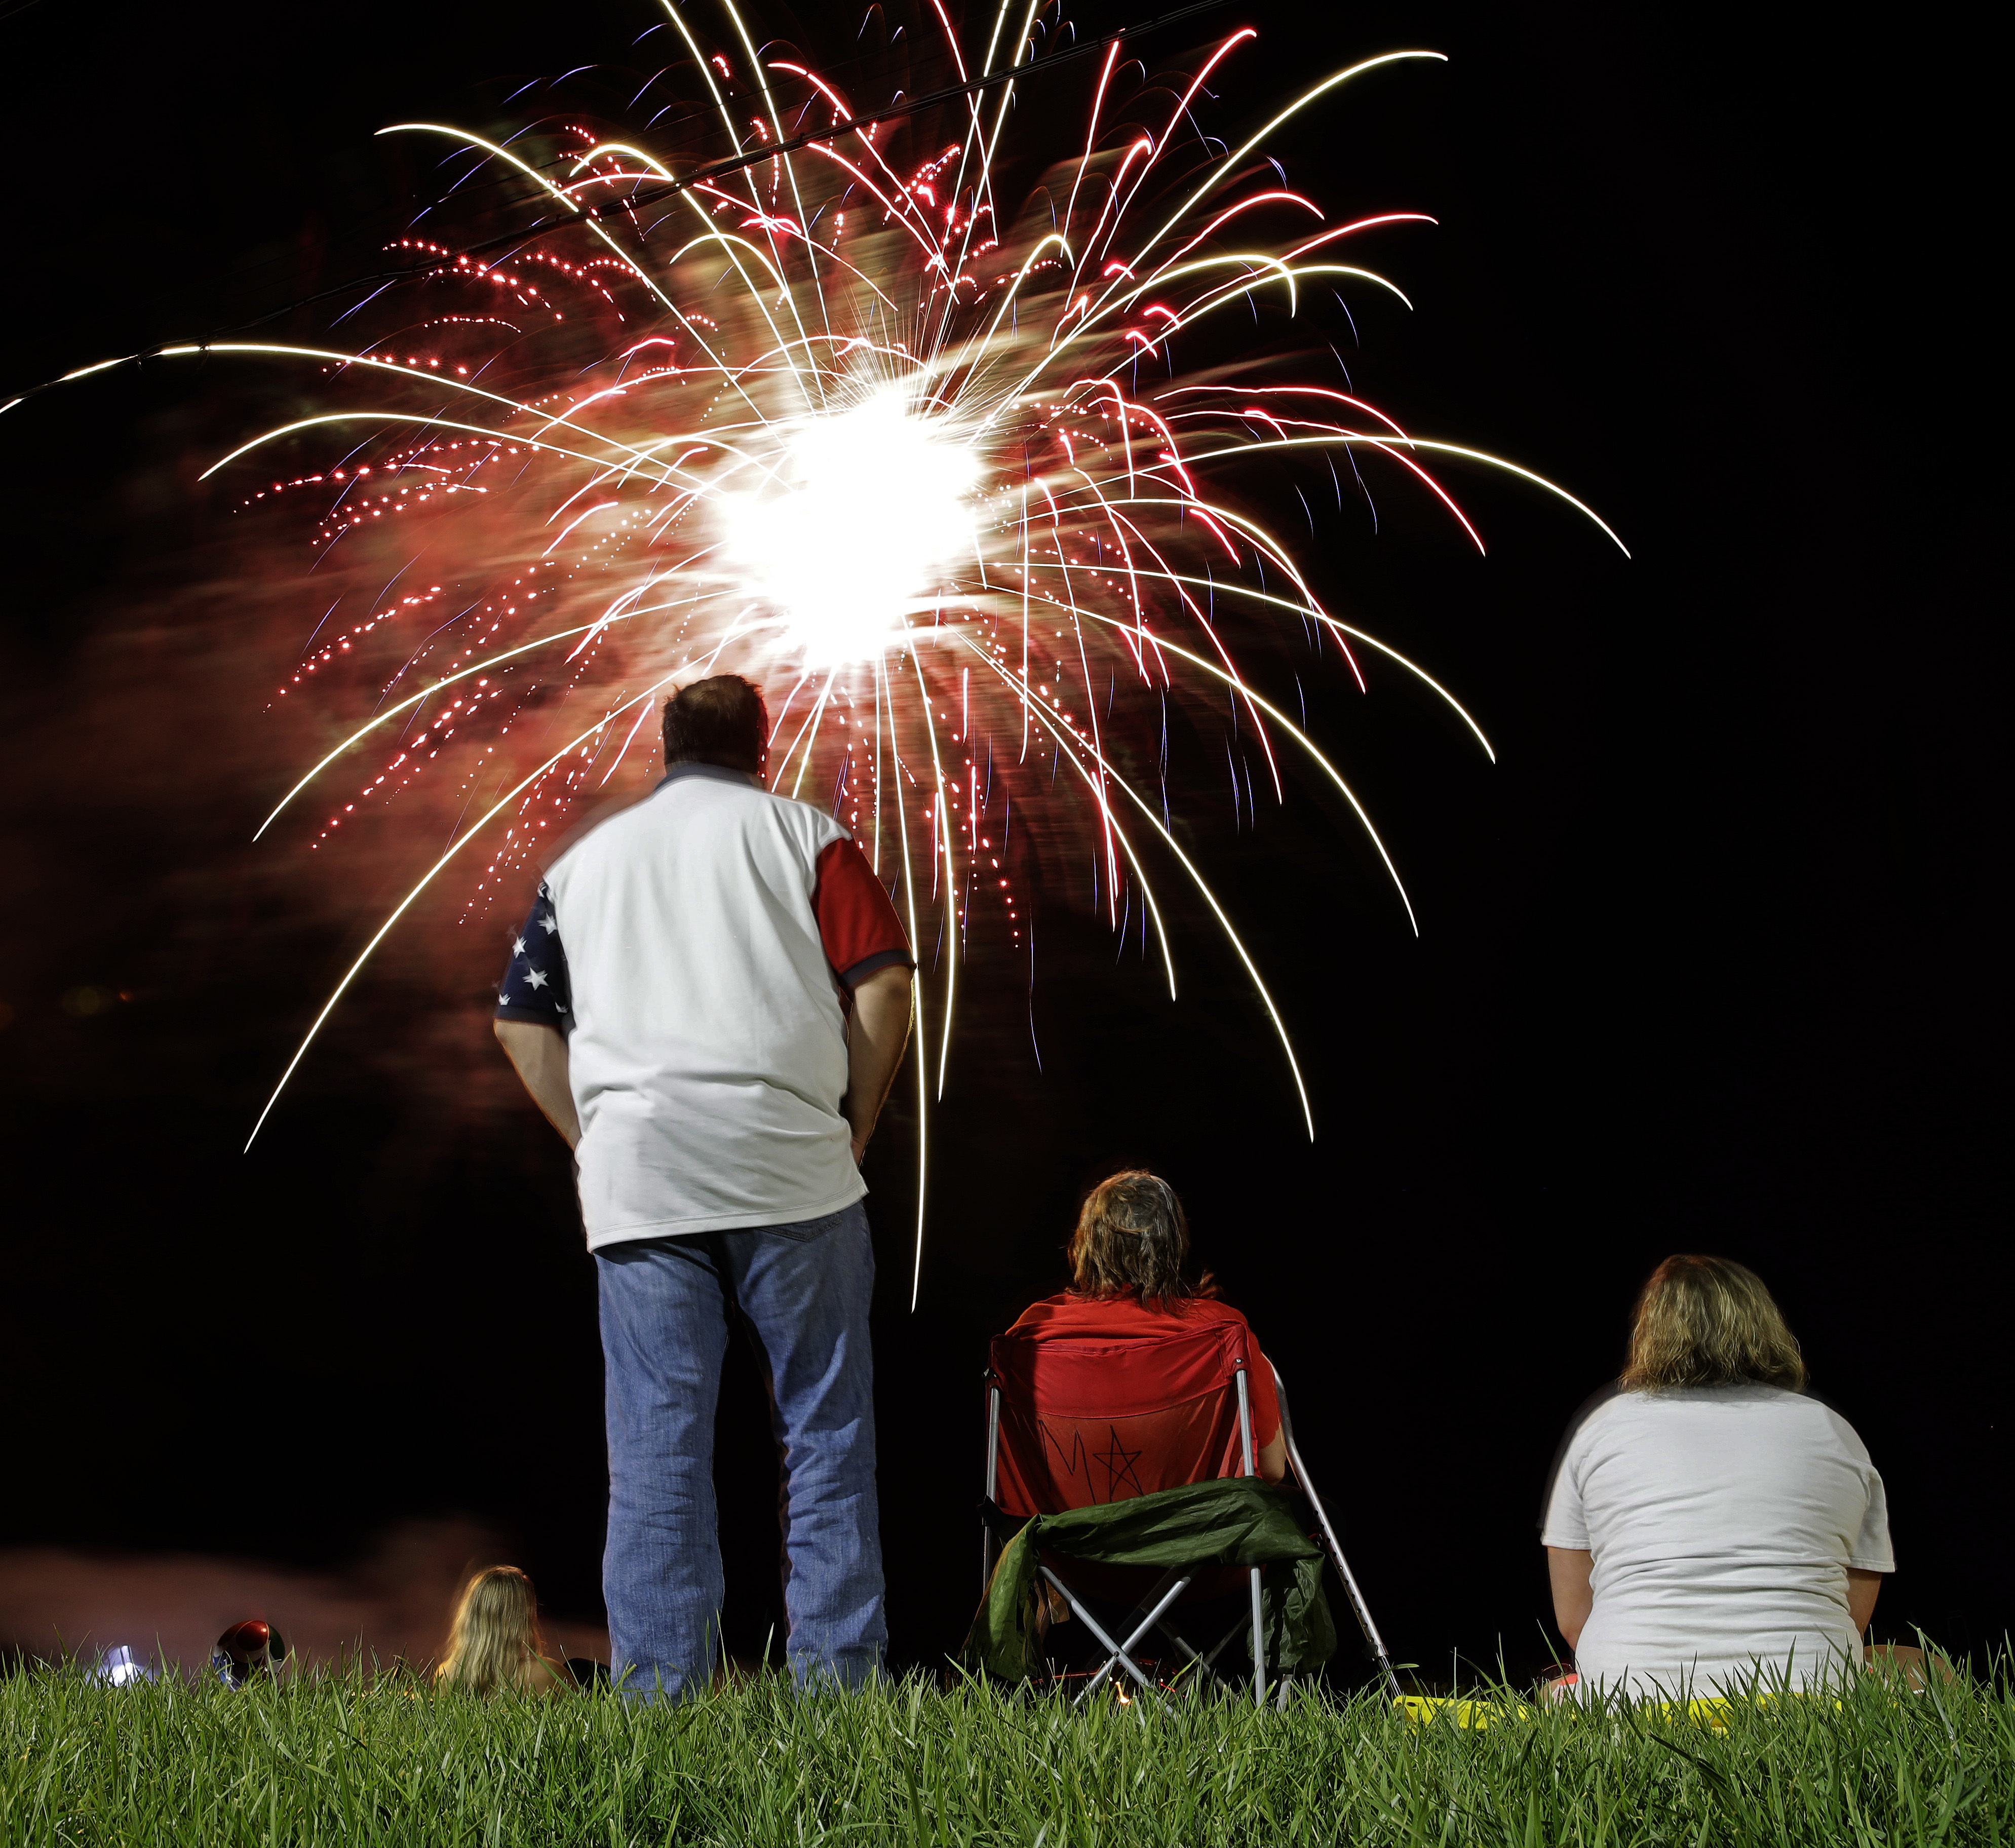 People watch a fireworks display for Independence Day at Worlds of Fun amusement park Monday, July 3, 2017, in Kansas City, Mo. (AP Photo/Charlie Riedel)